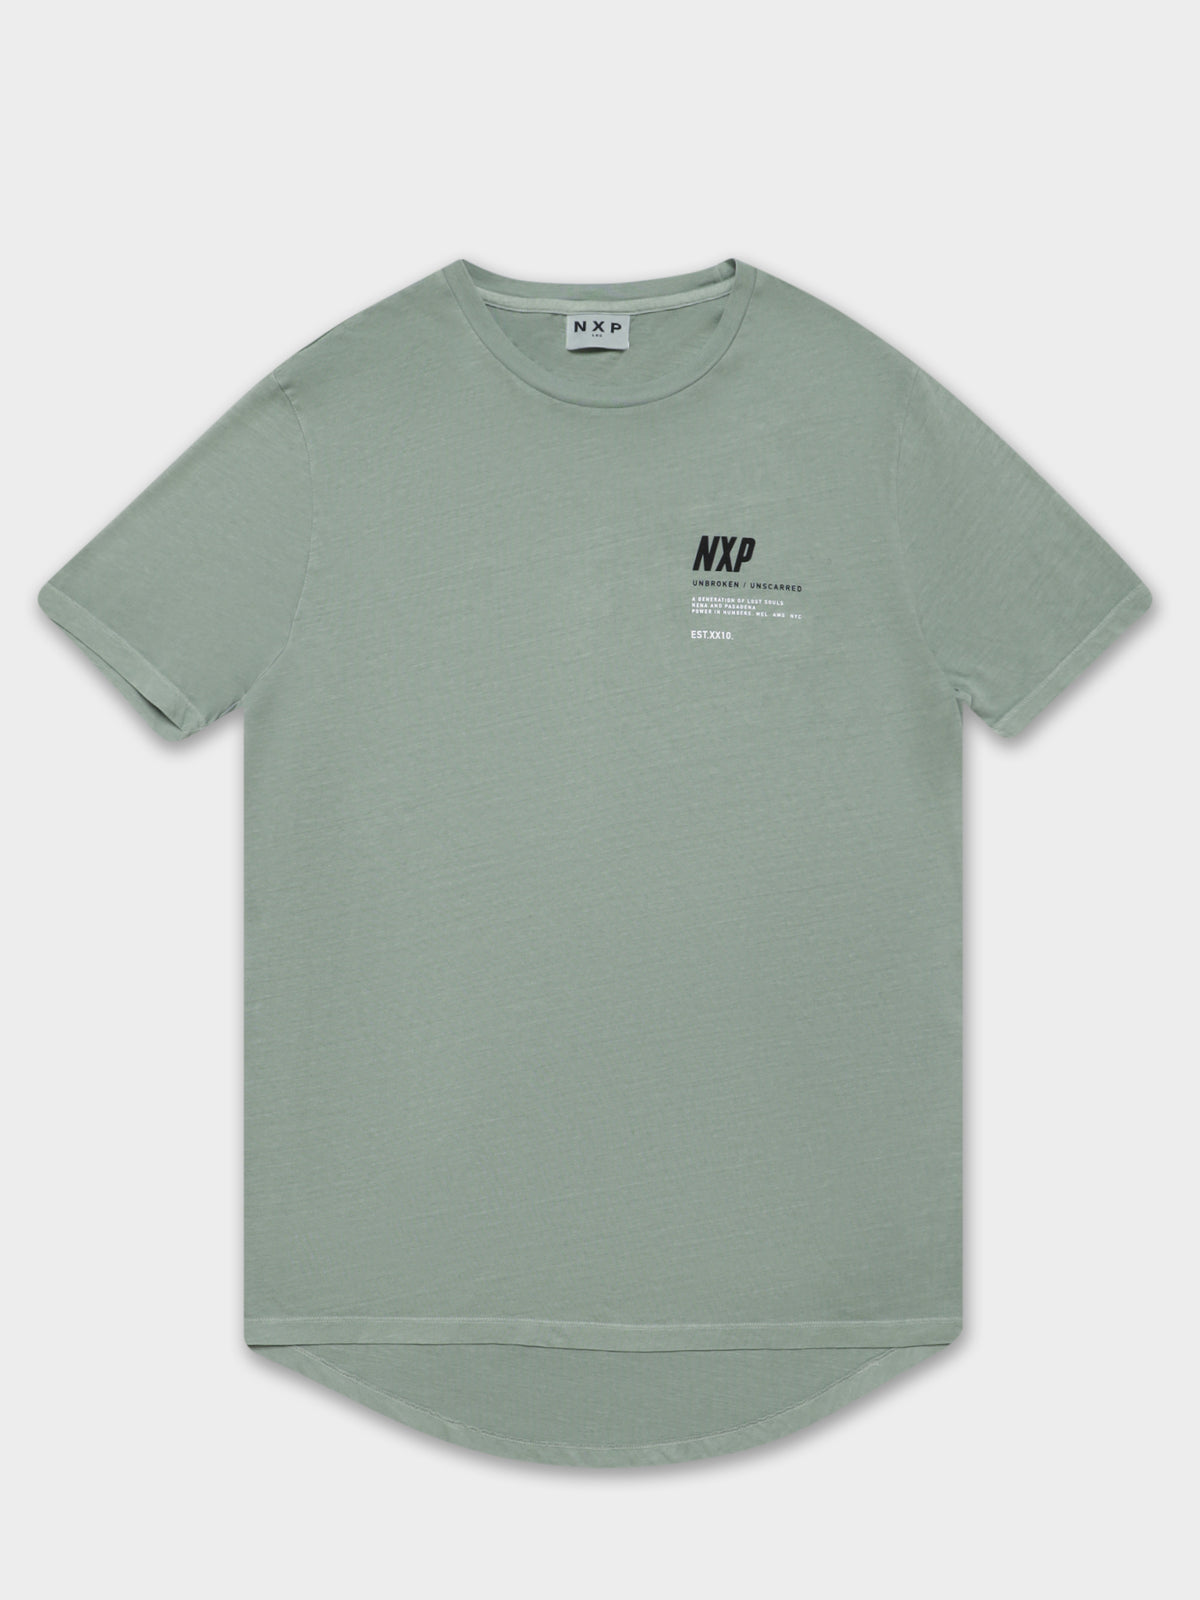 All Over Cape Back T-Shirt in Pigment Sage